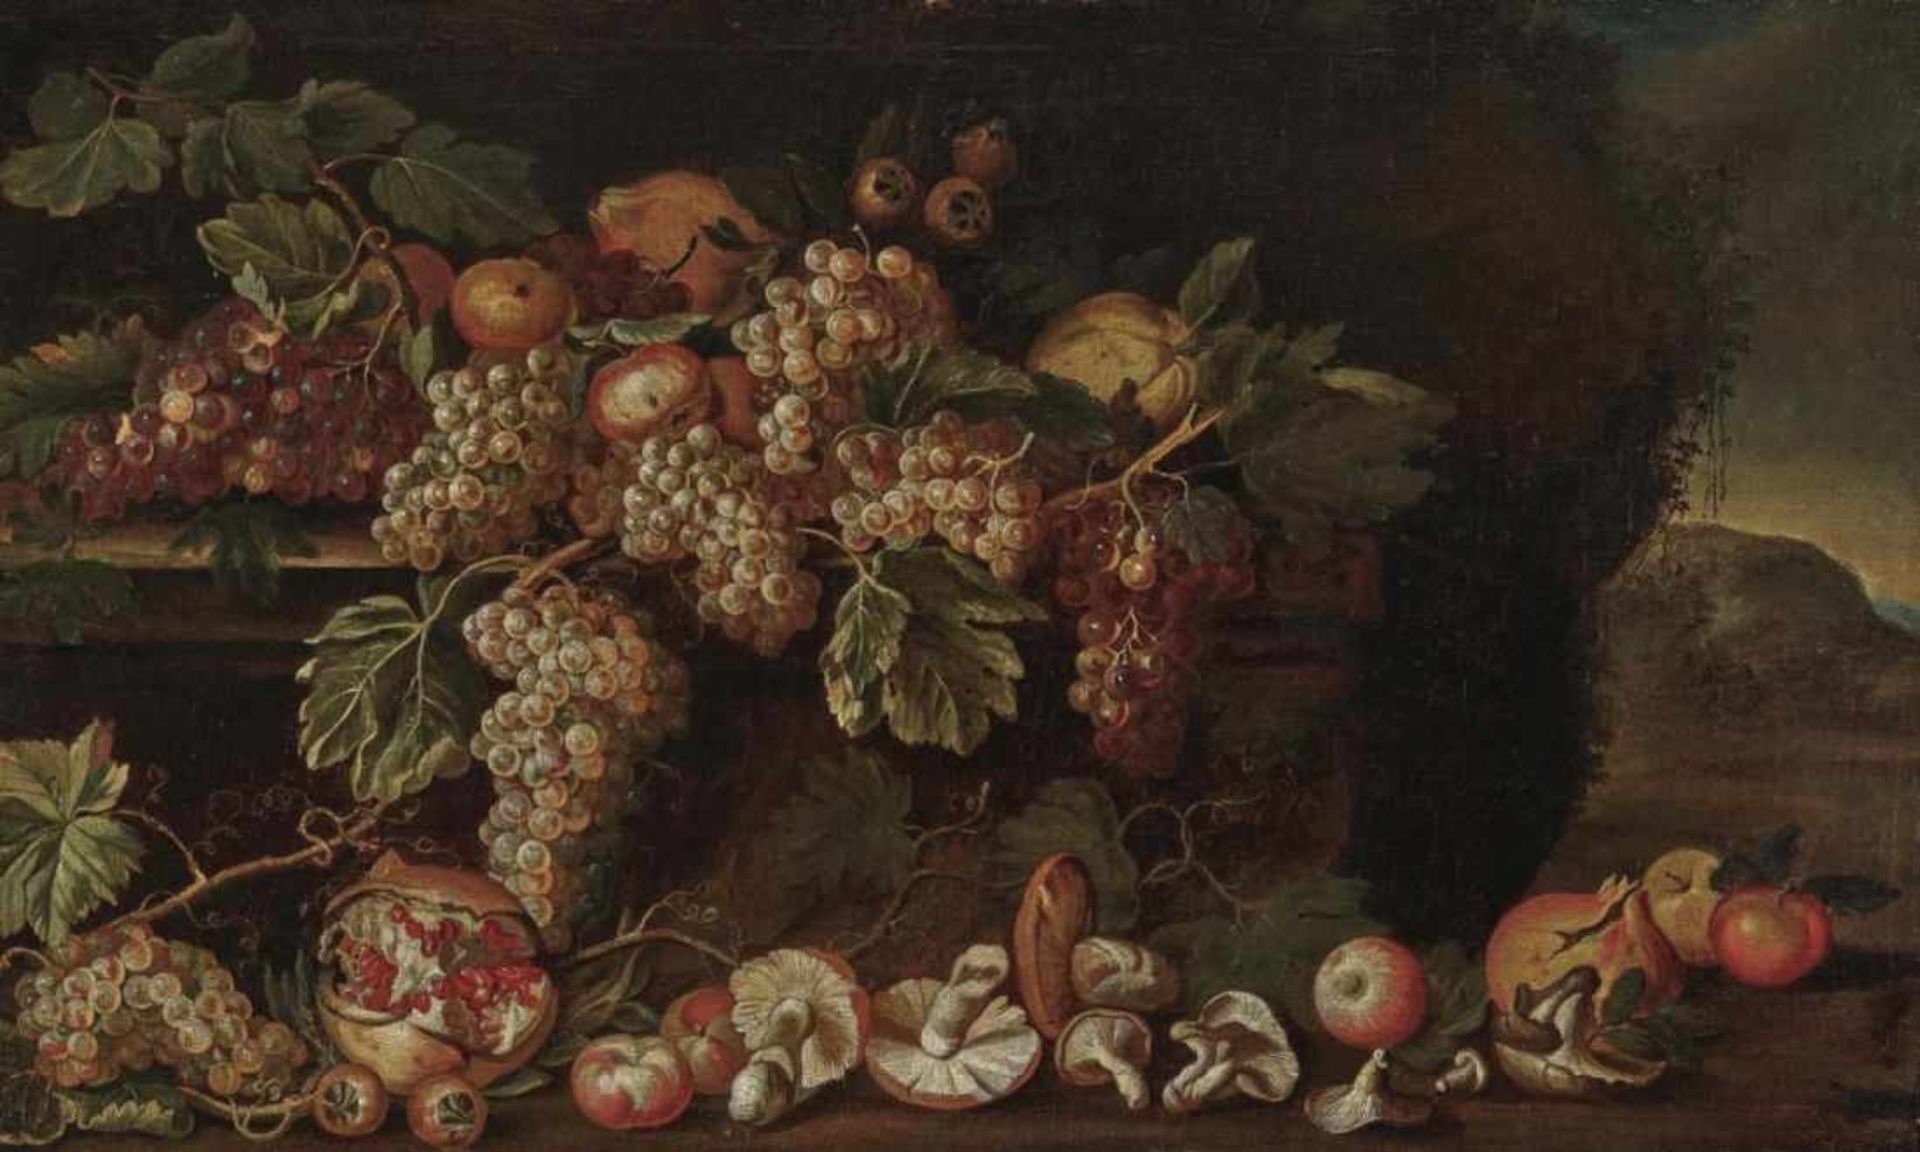 Italy, 17th centuryStill Life with Mushrooms and Fruits Oil on canvas. 70 x 117 cm. Relined.